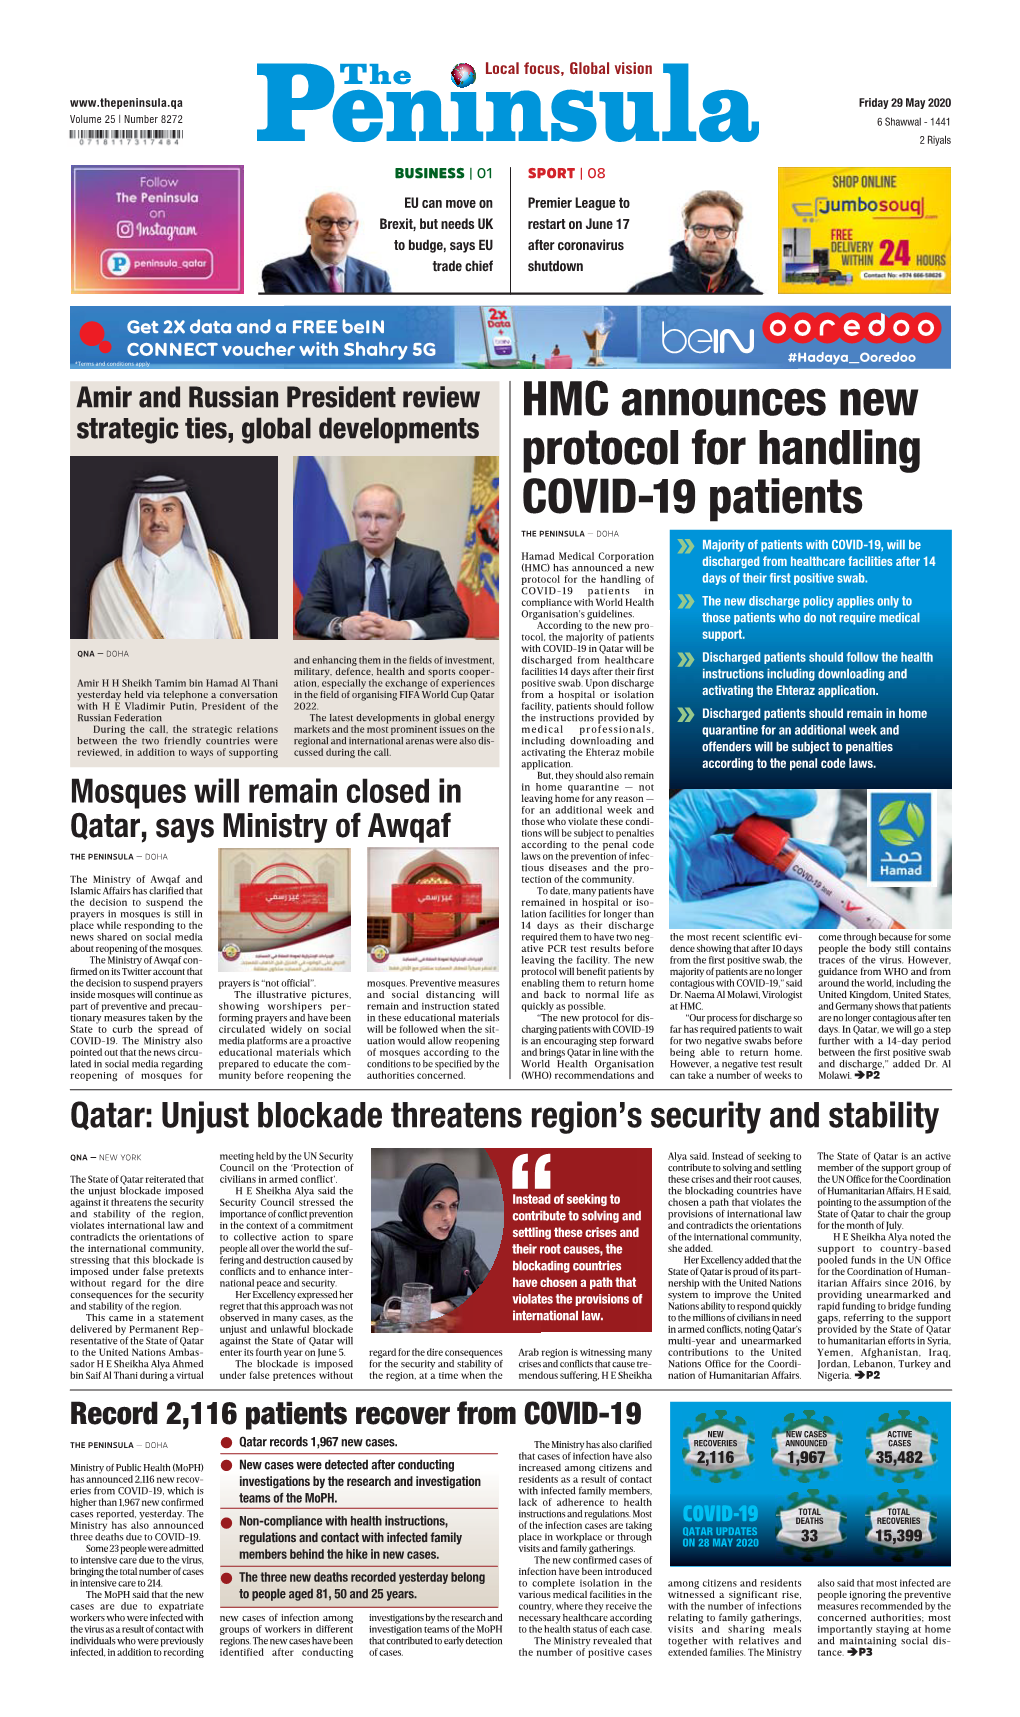 HMC Announces New Protocol for Handling COVID-19 Patients on March 25, 2020 for a General Ceasefire in the World